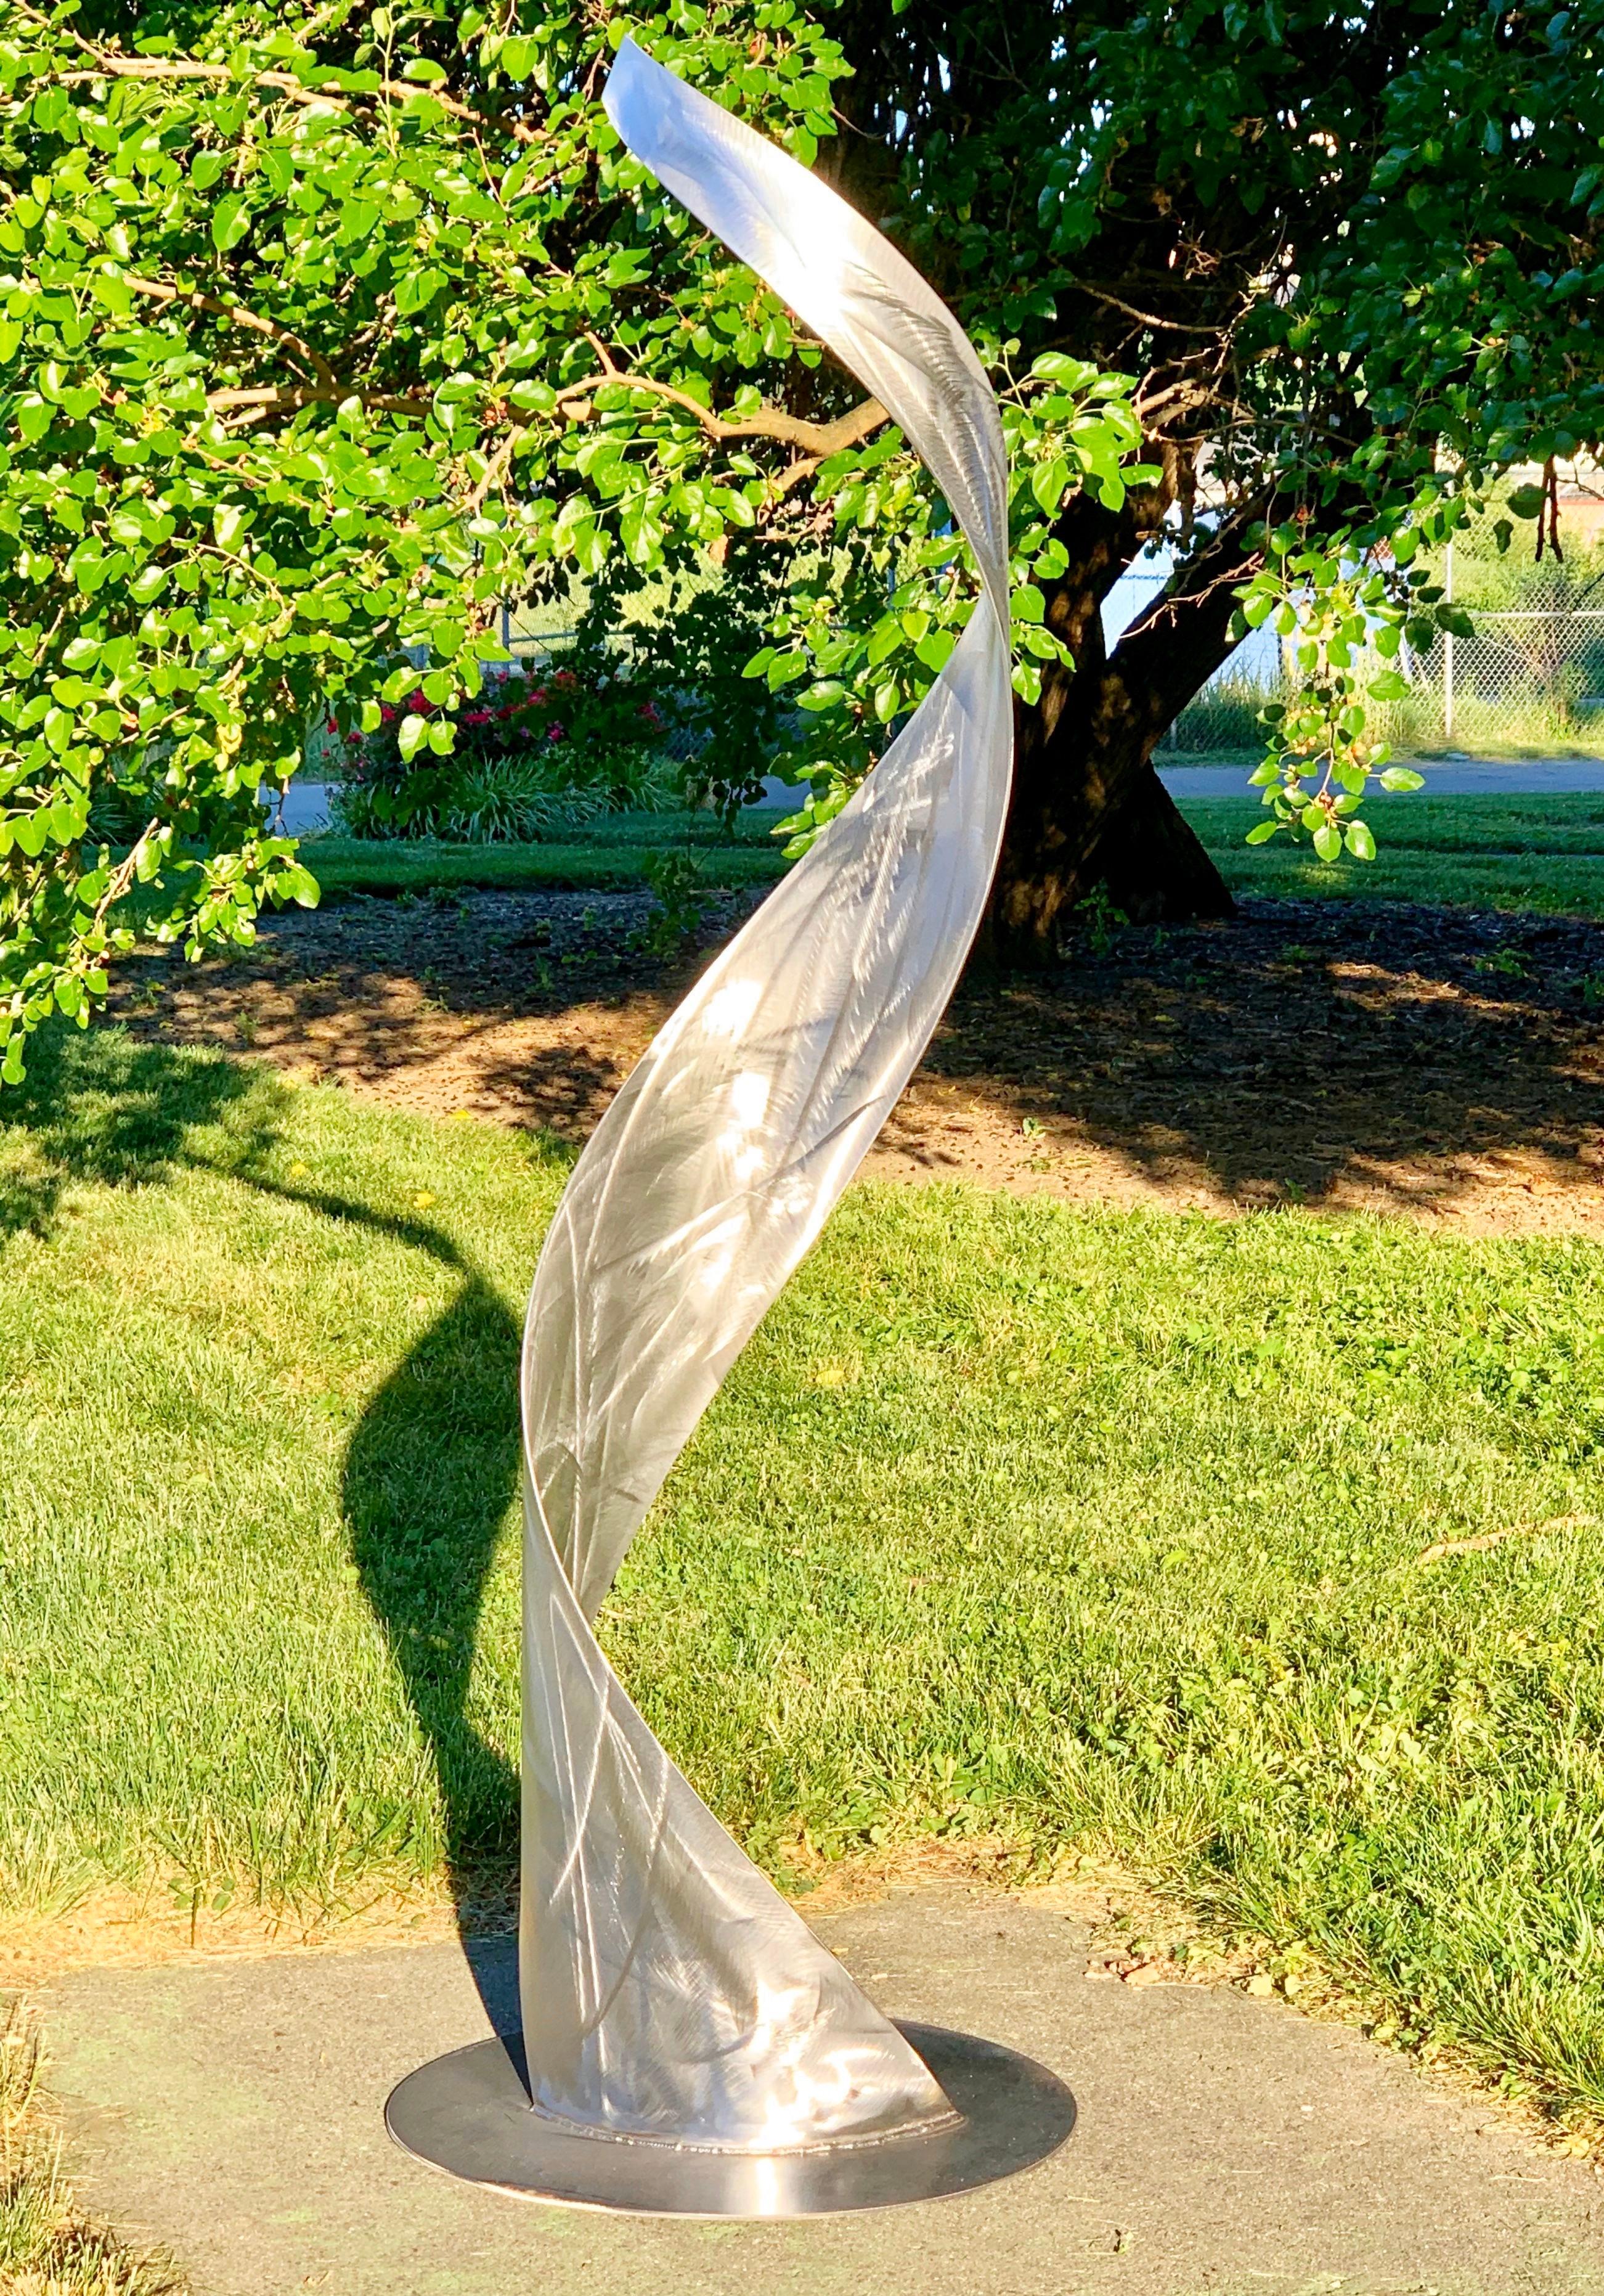 Twisted is a bent and welded steel sculpture suitable for both indoor and outdoor applications. Sebastian's signature hand-ground artistic design catches the light and attention of all who pass by.

Title: Twisted
Artist: Sebastian Reiter

Overall